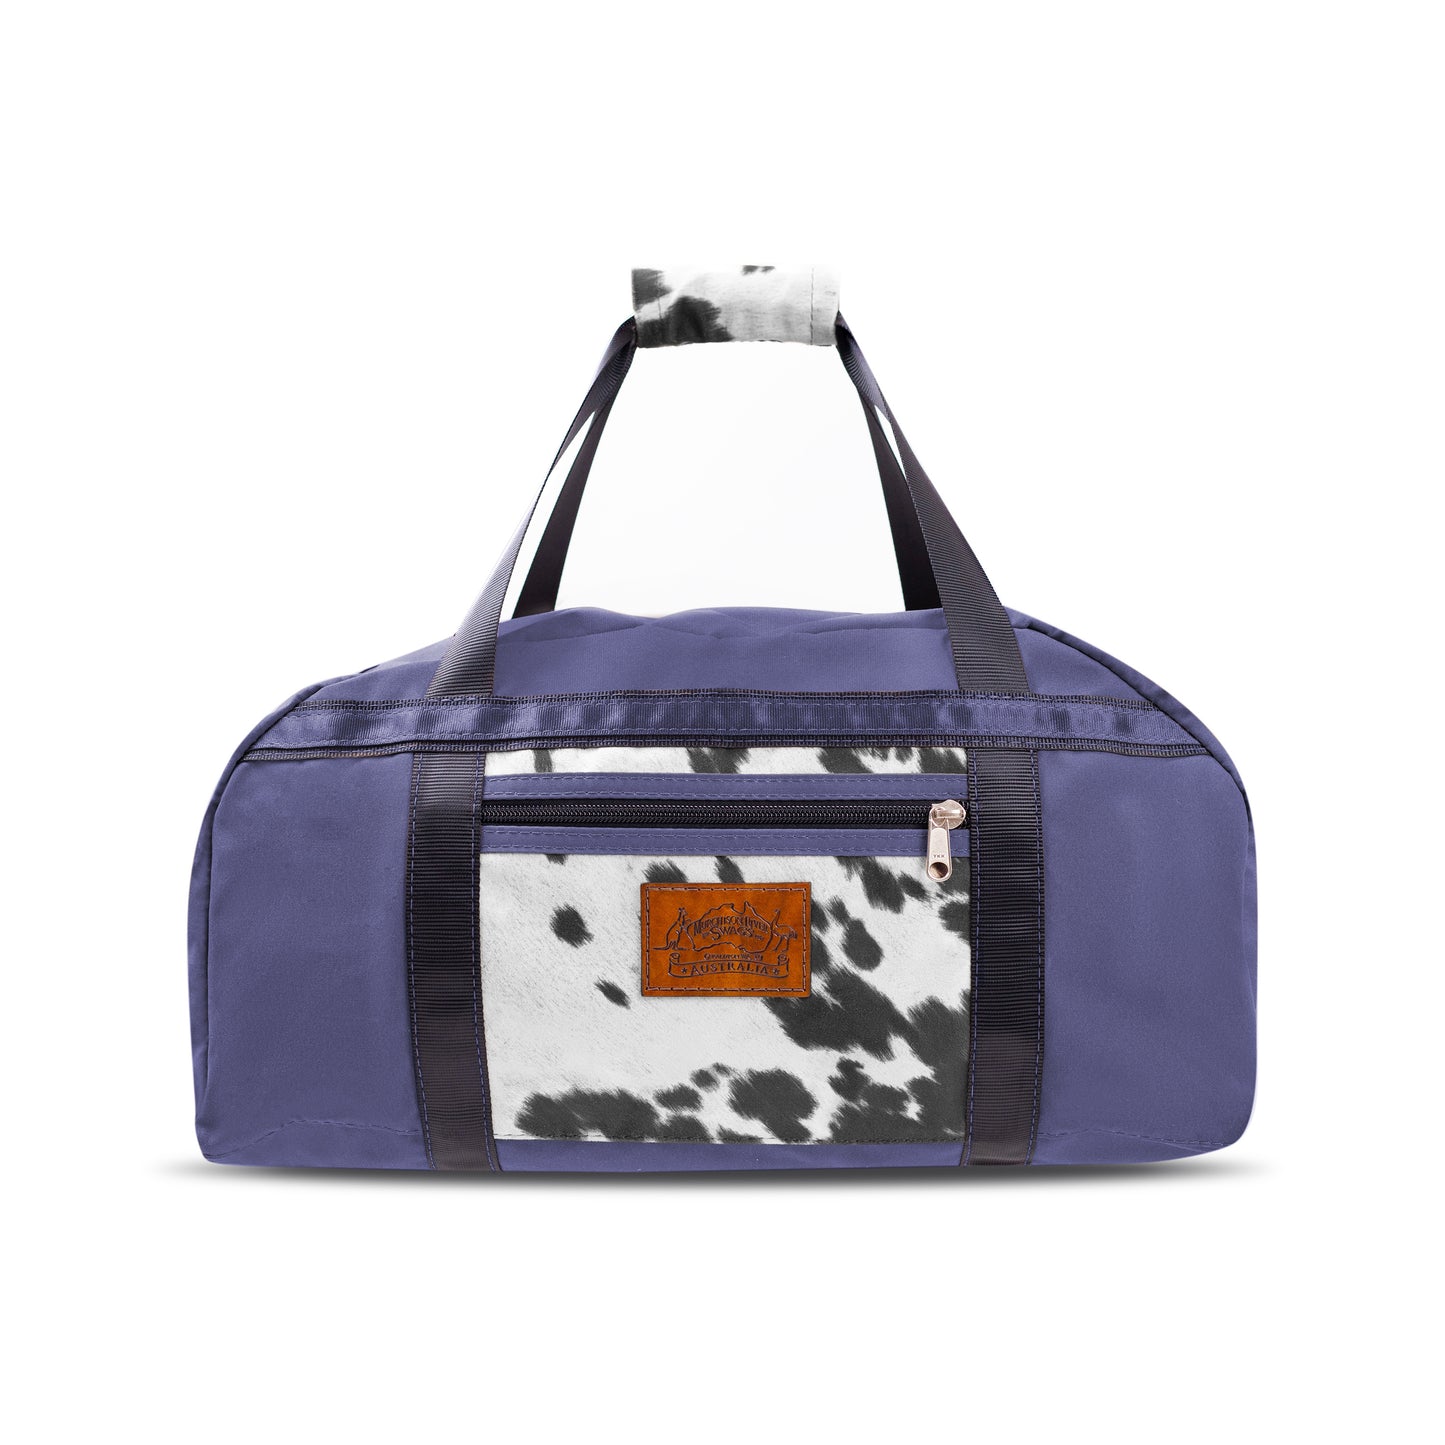 Navy Blue Canvas Travel Bag with limited edition cow print fabric.